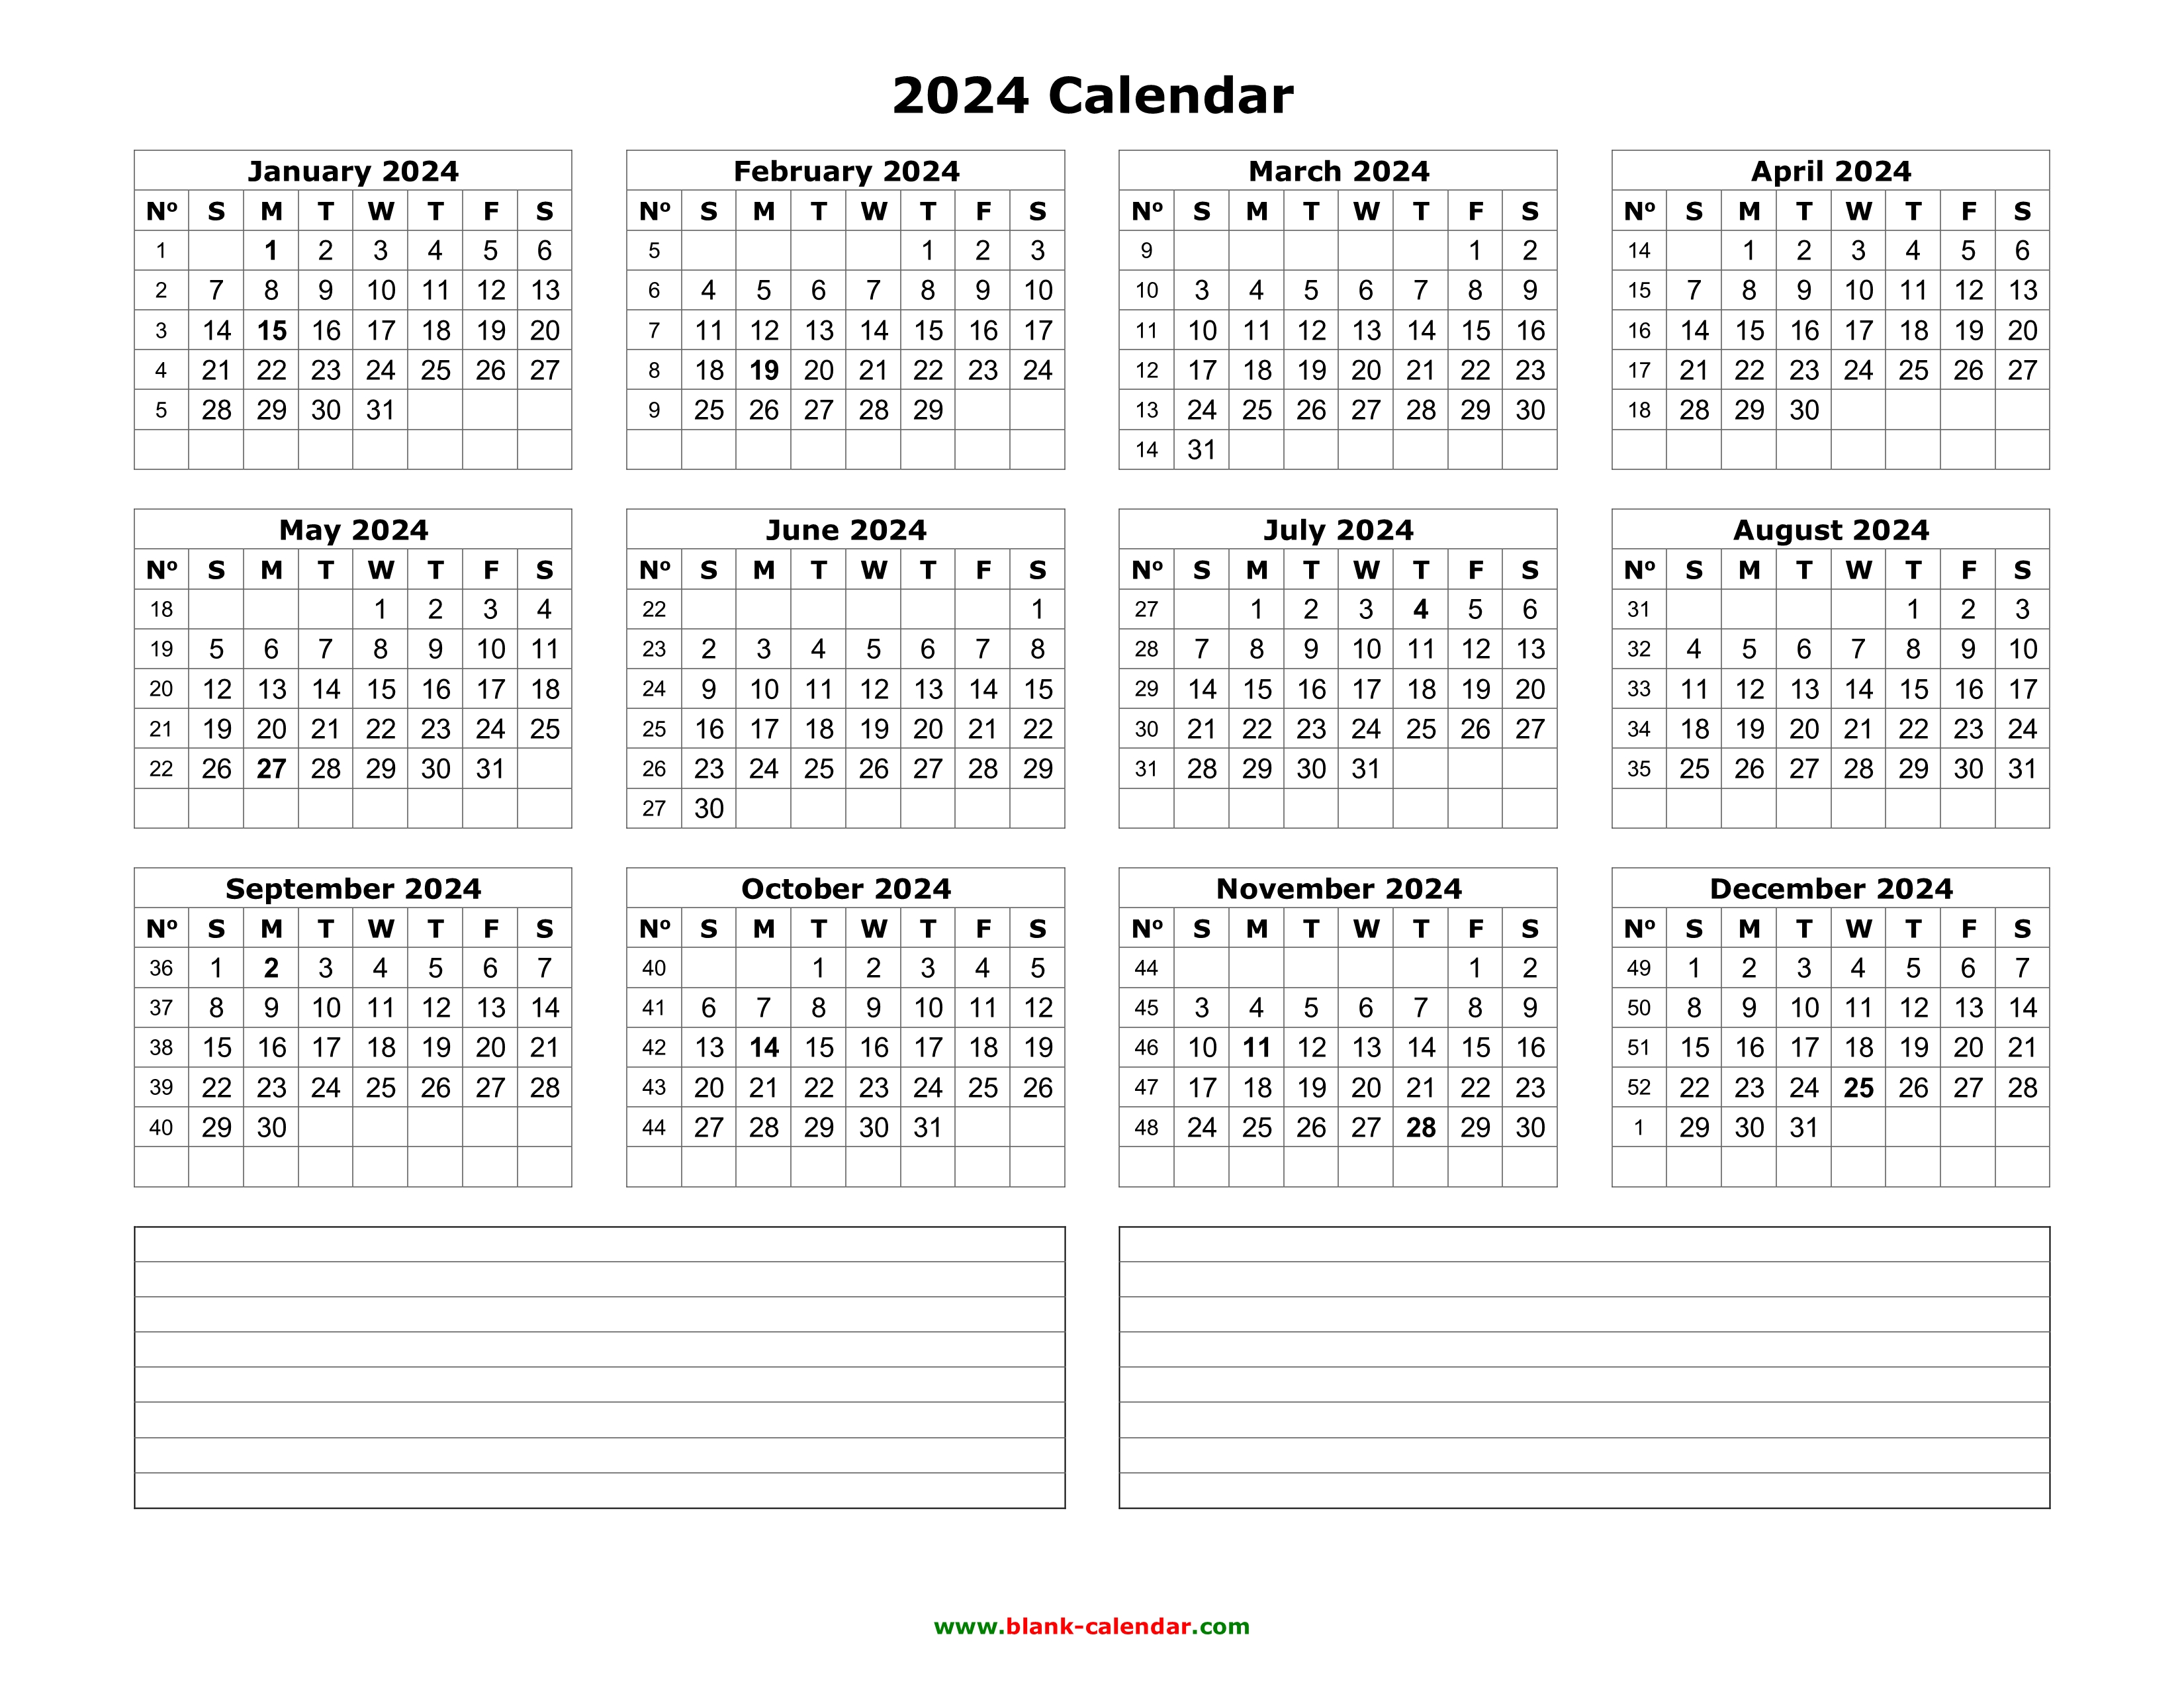 2024 calendar templates and images - 2024 yearly calendar blank minimal ...